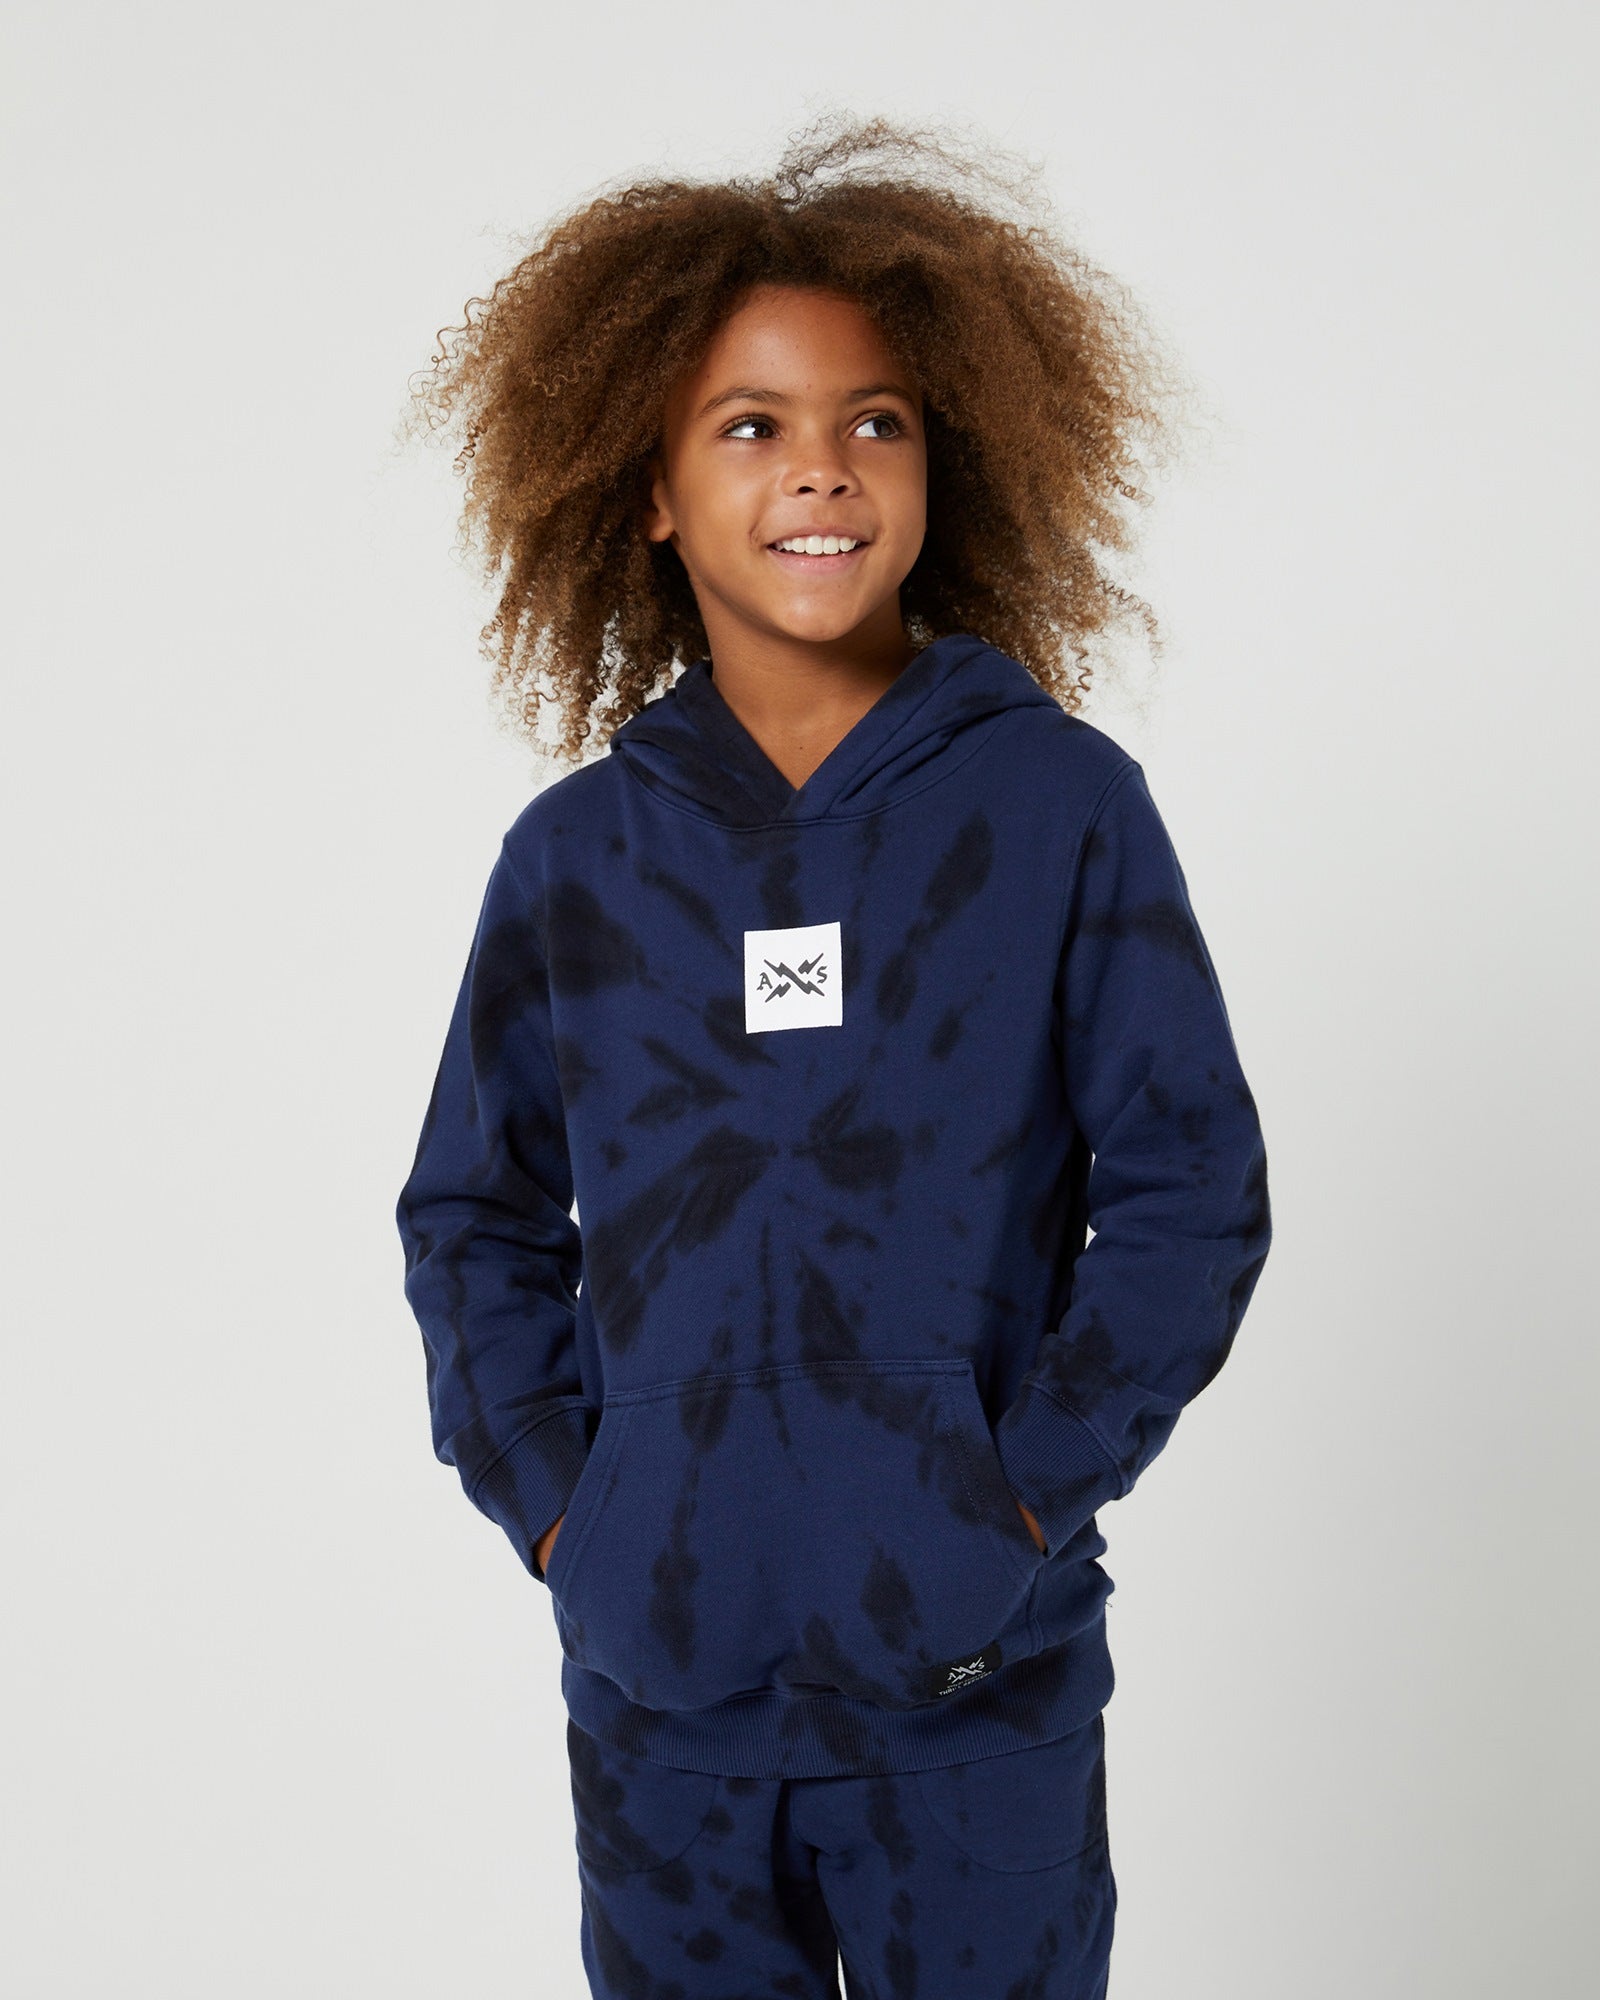 Alphabet Soup Teen Box Hoodie in midnight blue tie dye, made with 100% cotton and a tie-dye fabric, your little skater will love the oversized fit, kangaroo pocket, and logo embroidery patch on the centre chest.